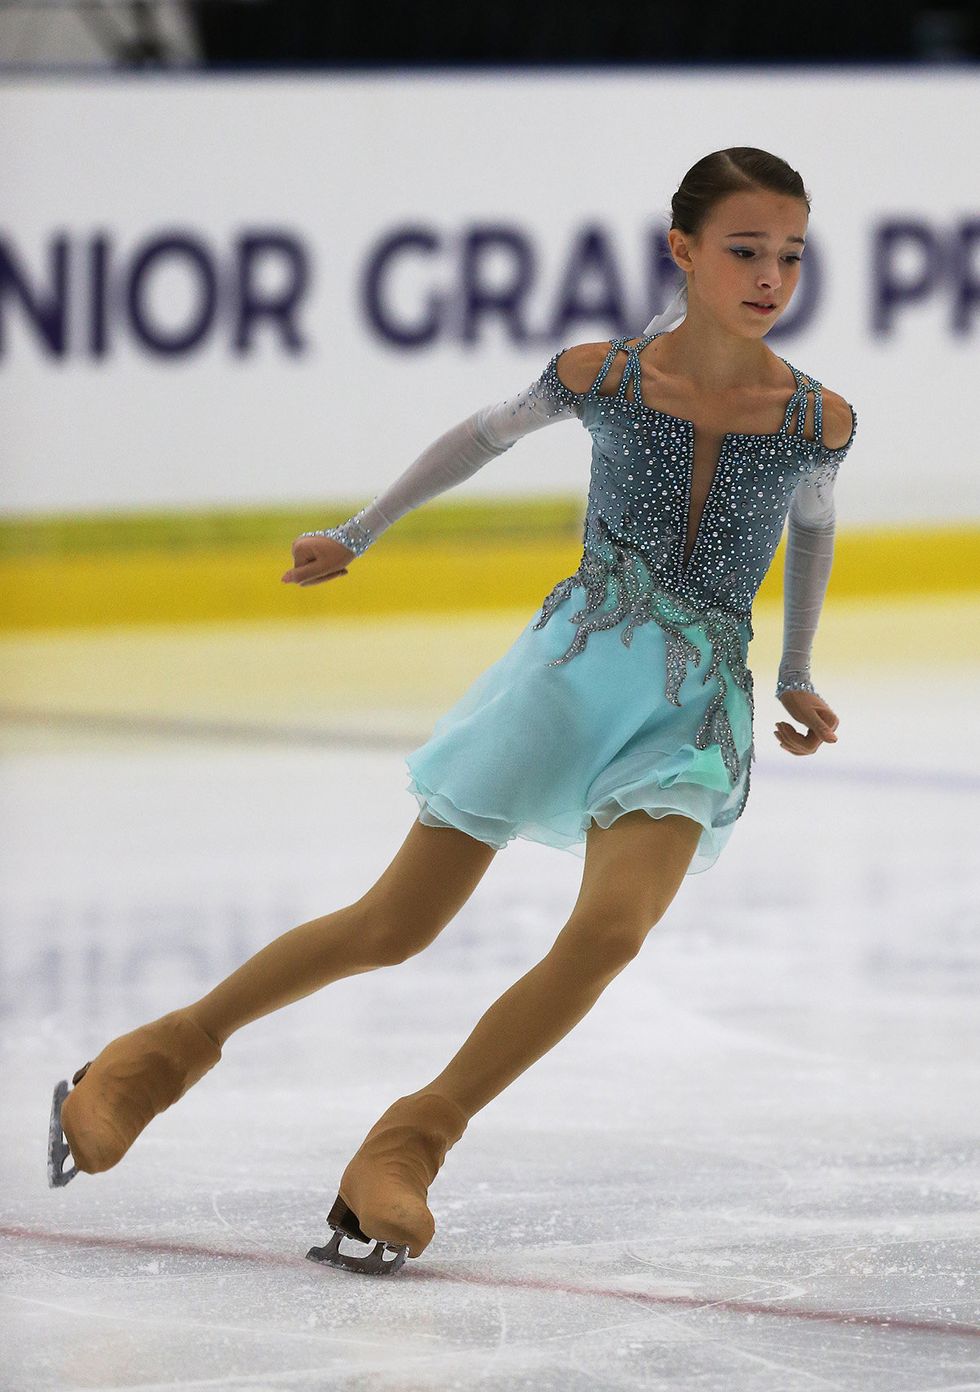 Figure skate, Skating, Ice skating, Figure skating, Ice dancing, Ice skate, Recreation, Jumping, Sports, Axel jump, 